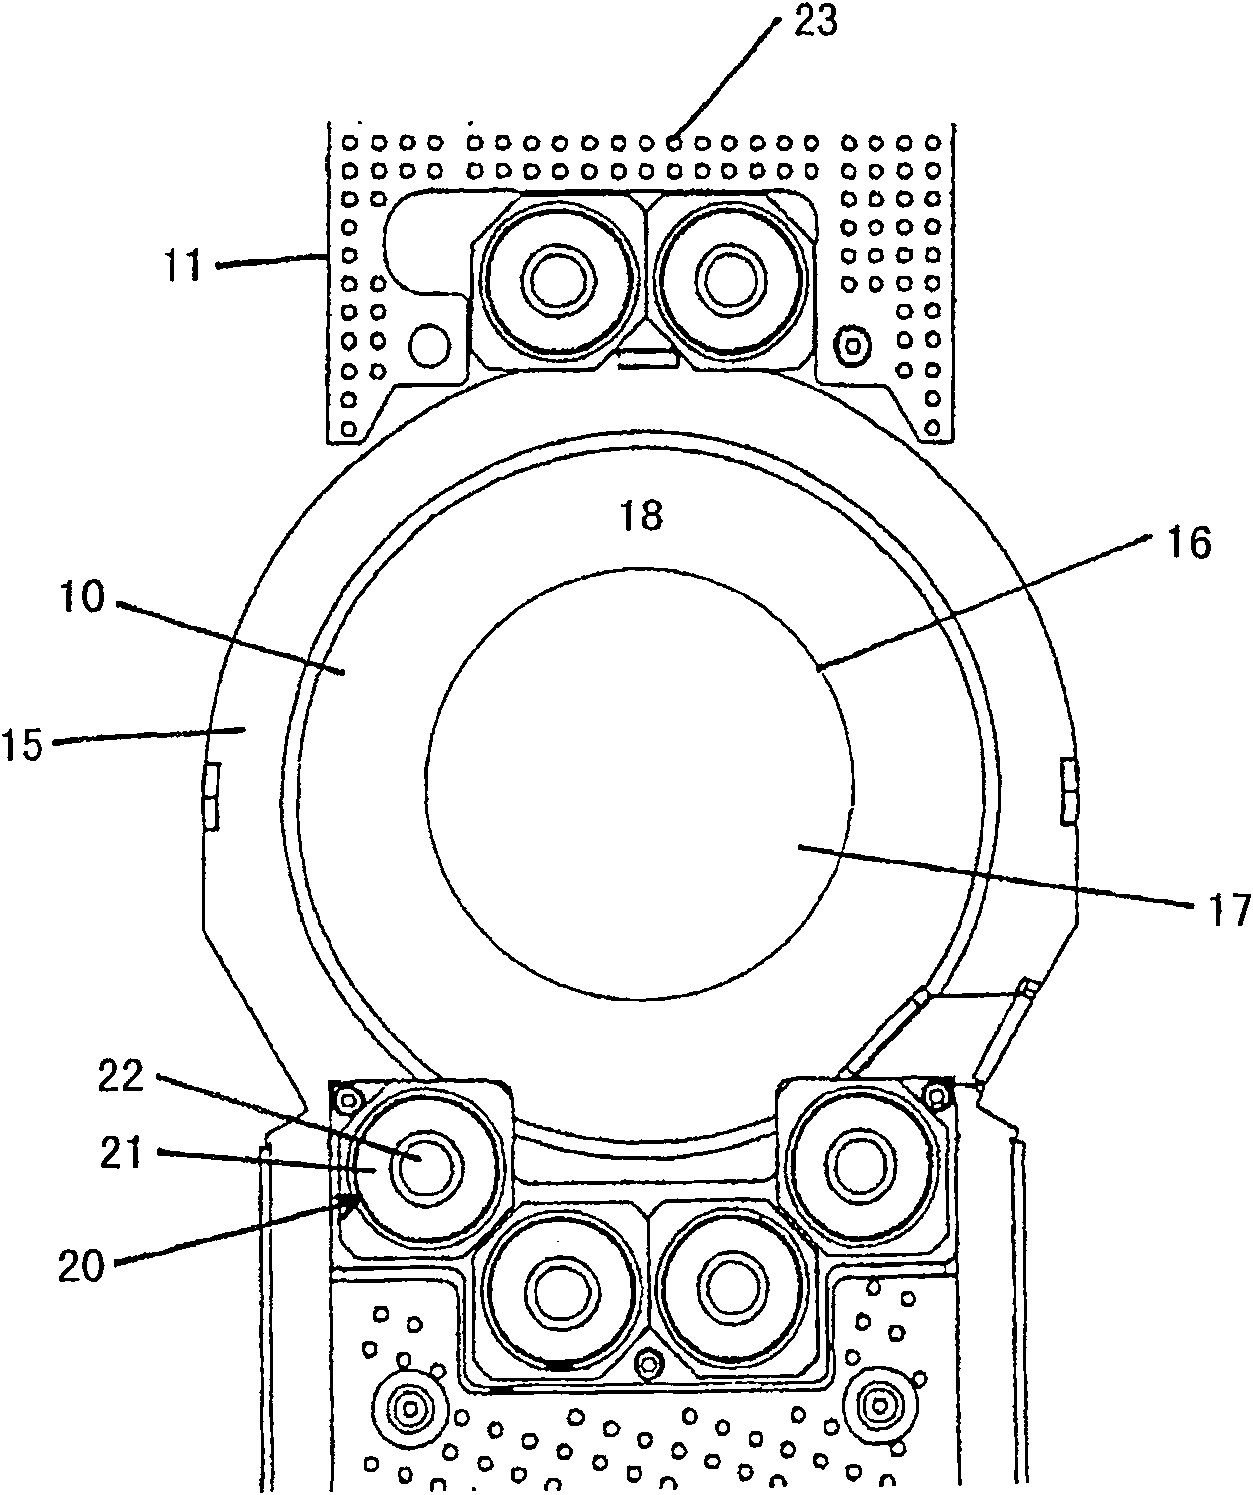 Stamping machine with elastic supporting work piece support and method for supporting work piece in the stamping machine